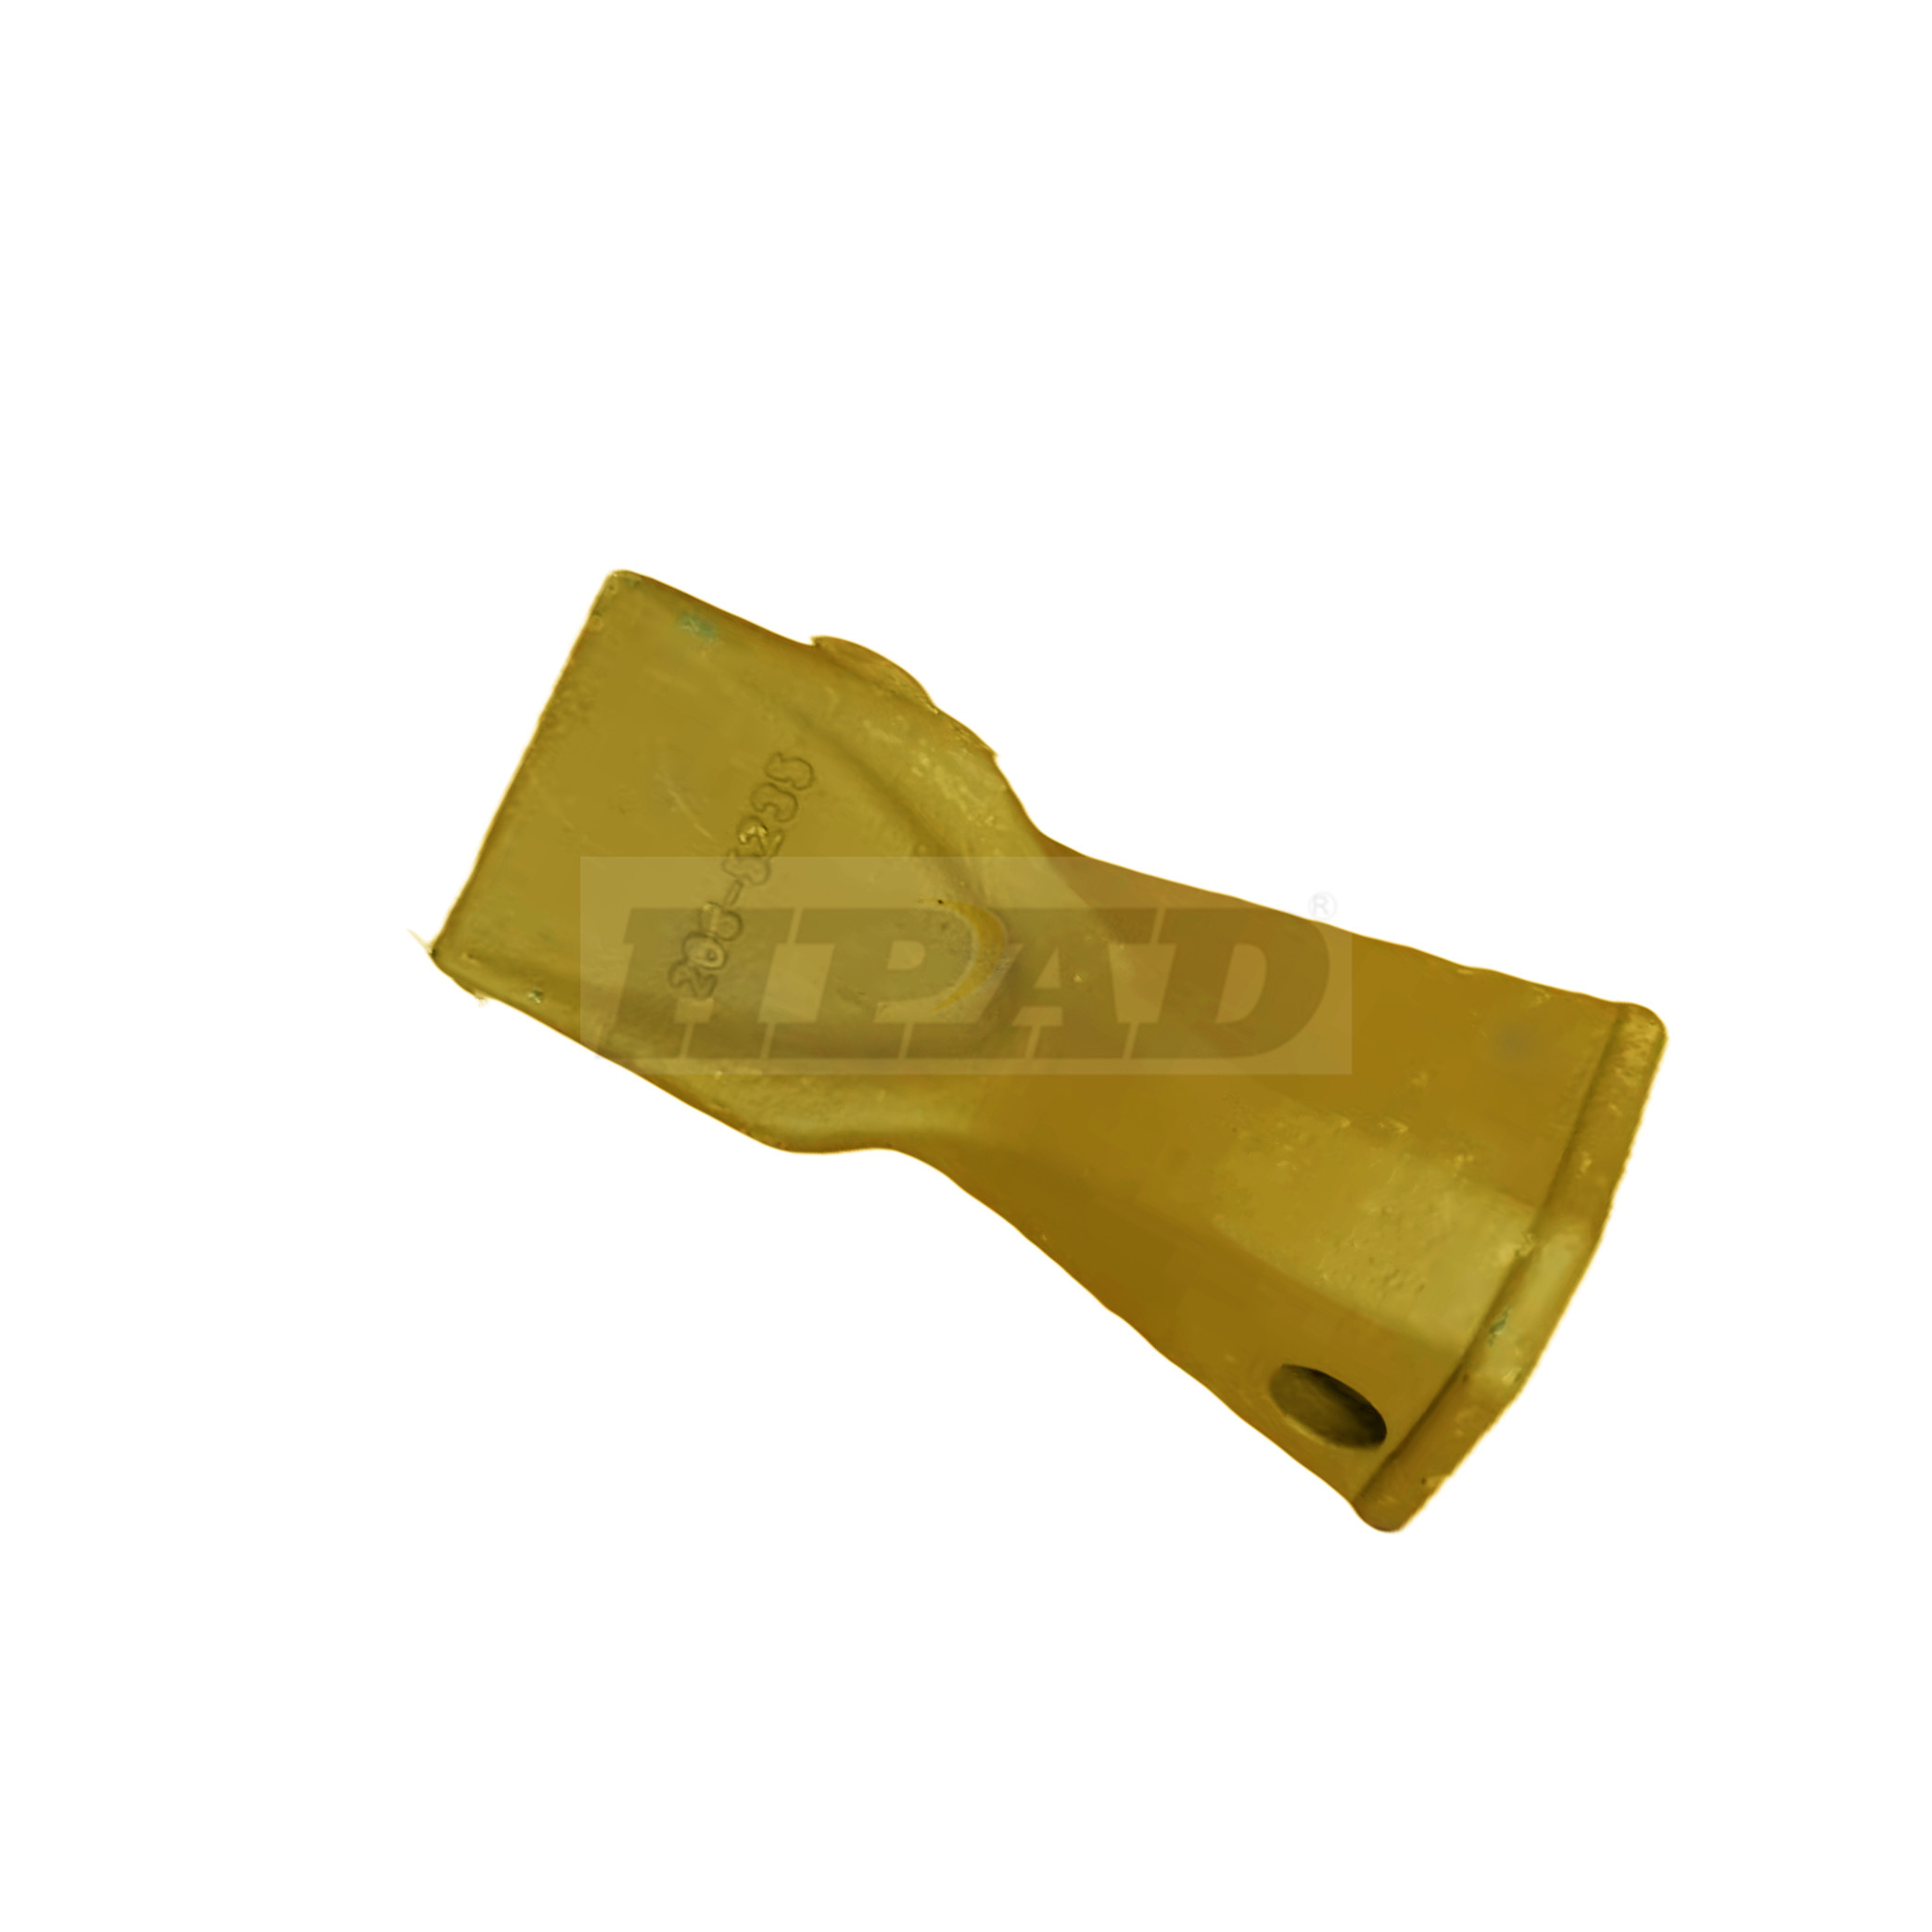 Construction Machinery Wear Parts Bucket Tooth 208-5235